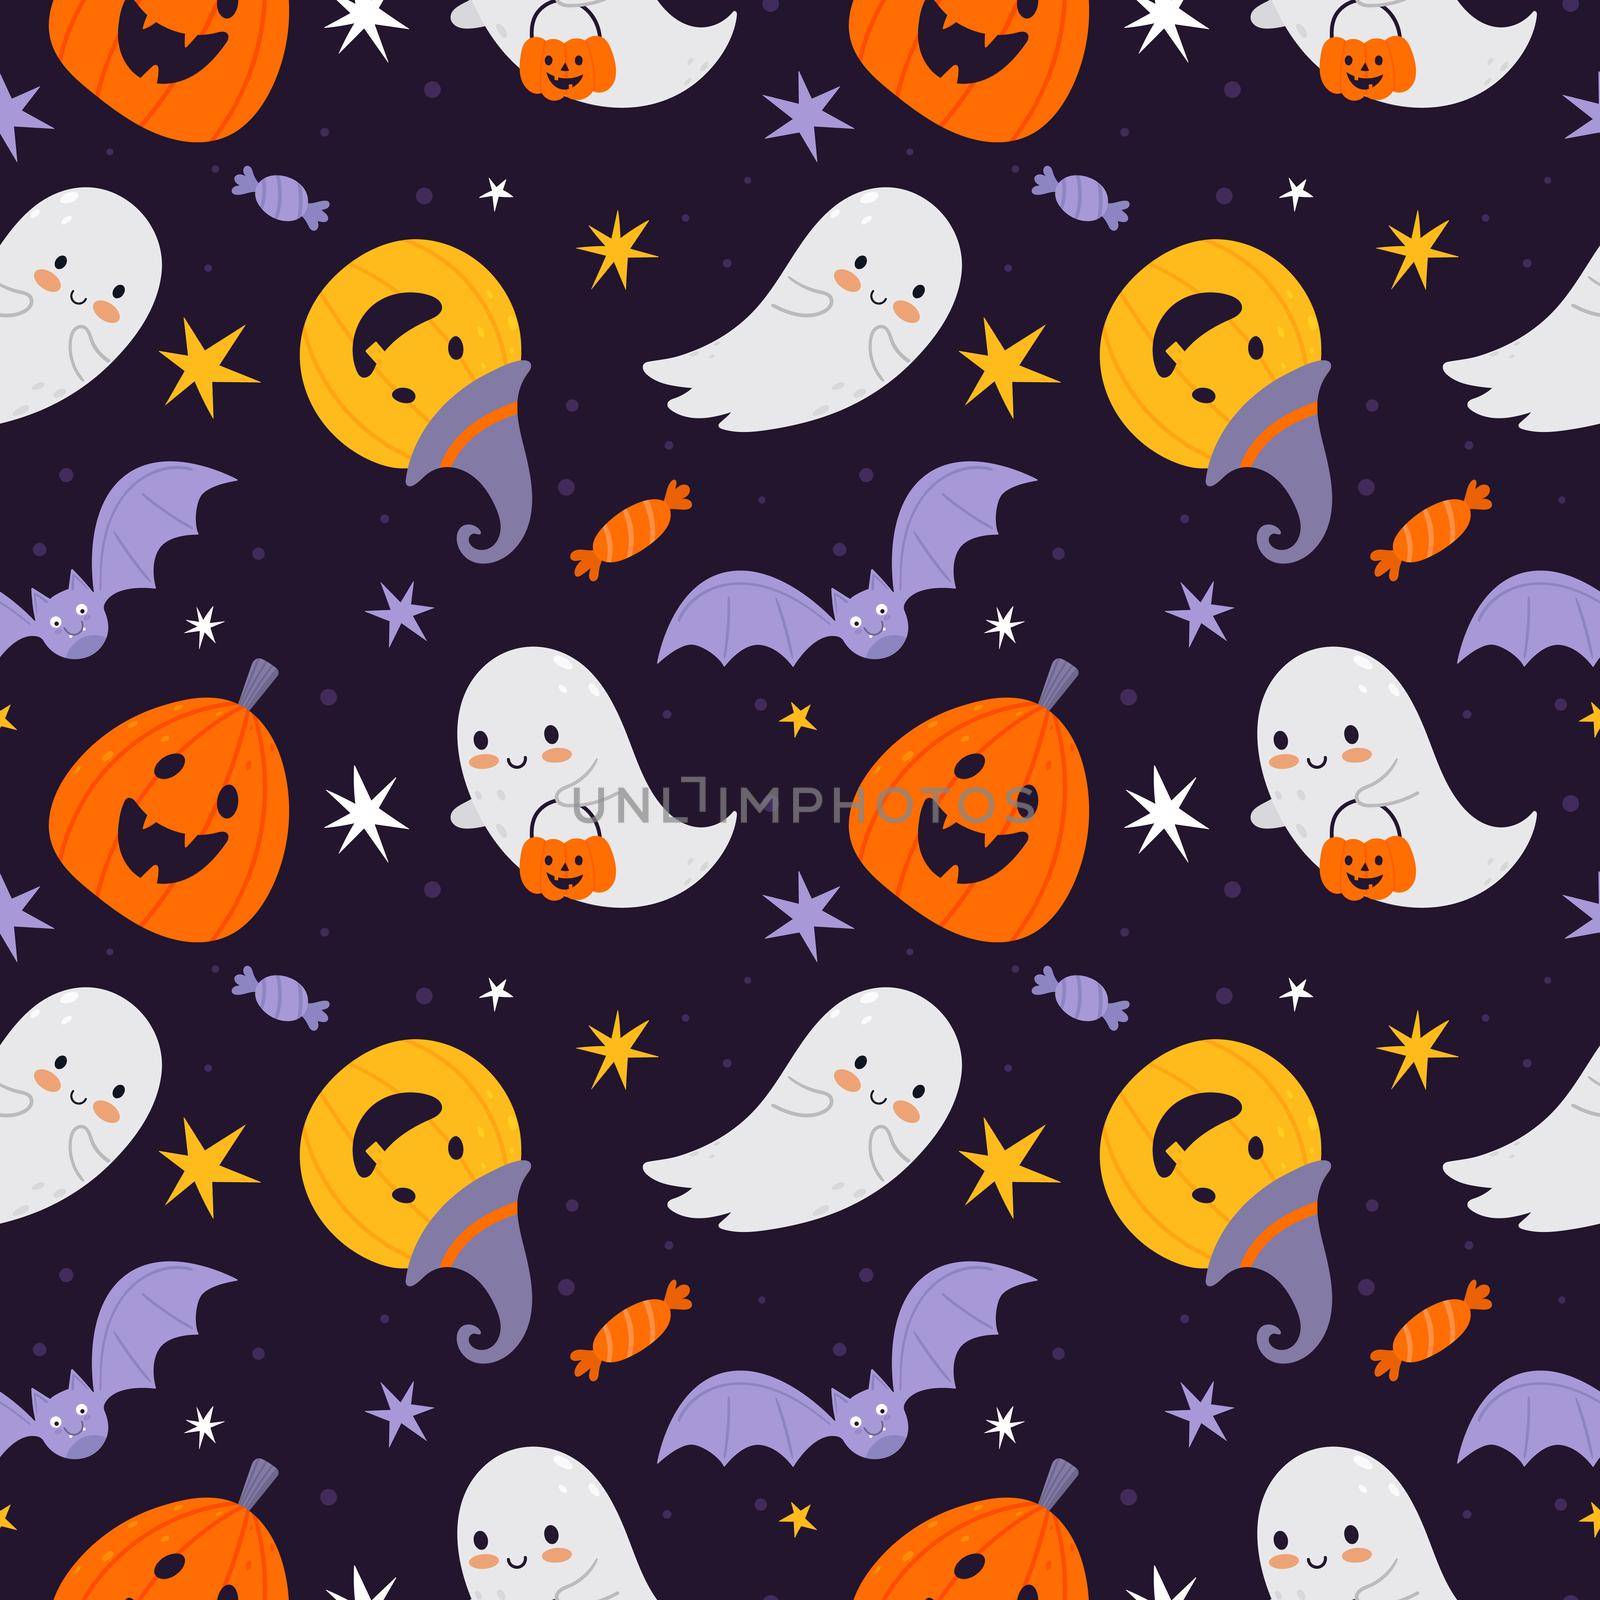 Halloween seamless pattern with pumpkins and bats and Halloween ghosts. by Lena_Khmelniuk